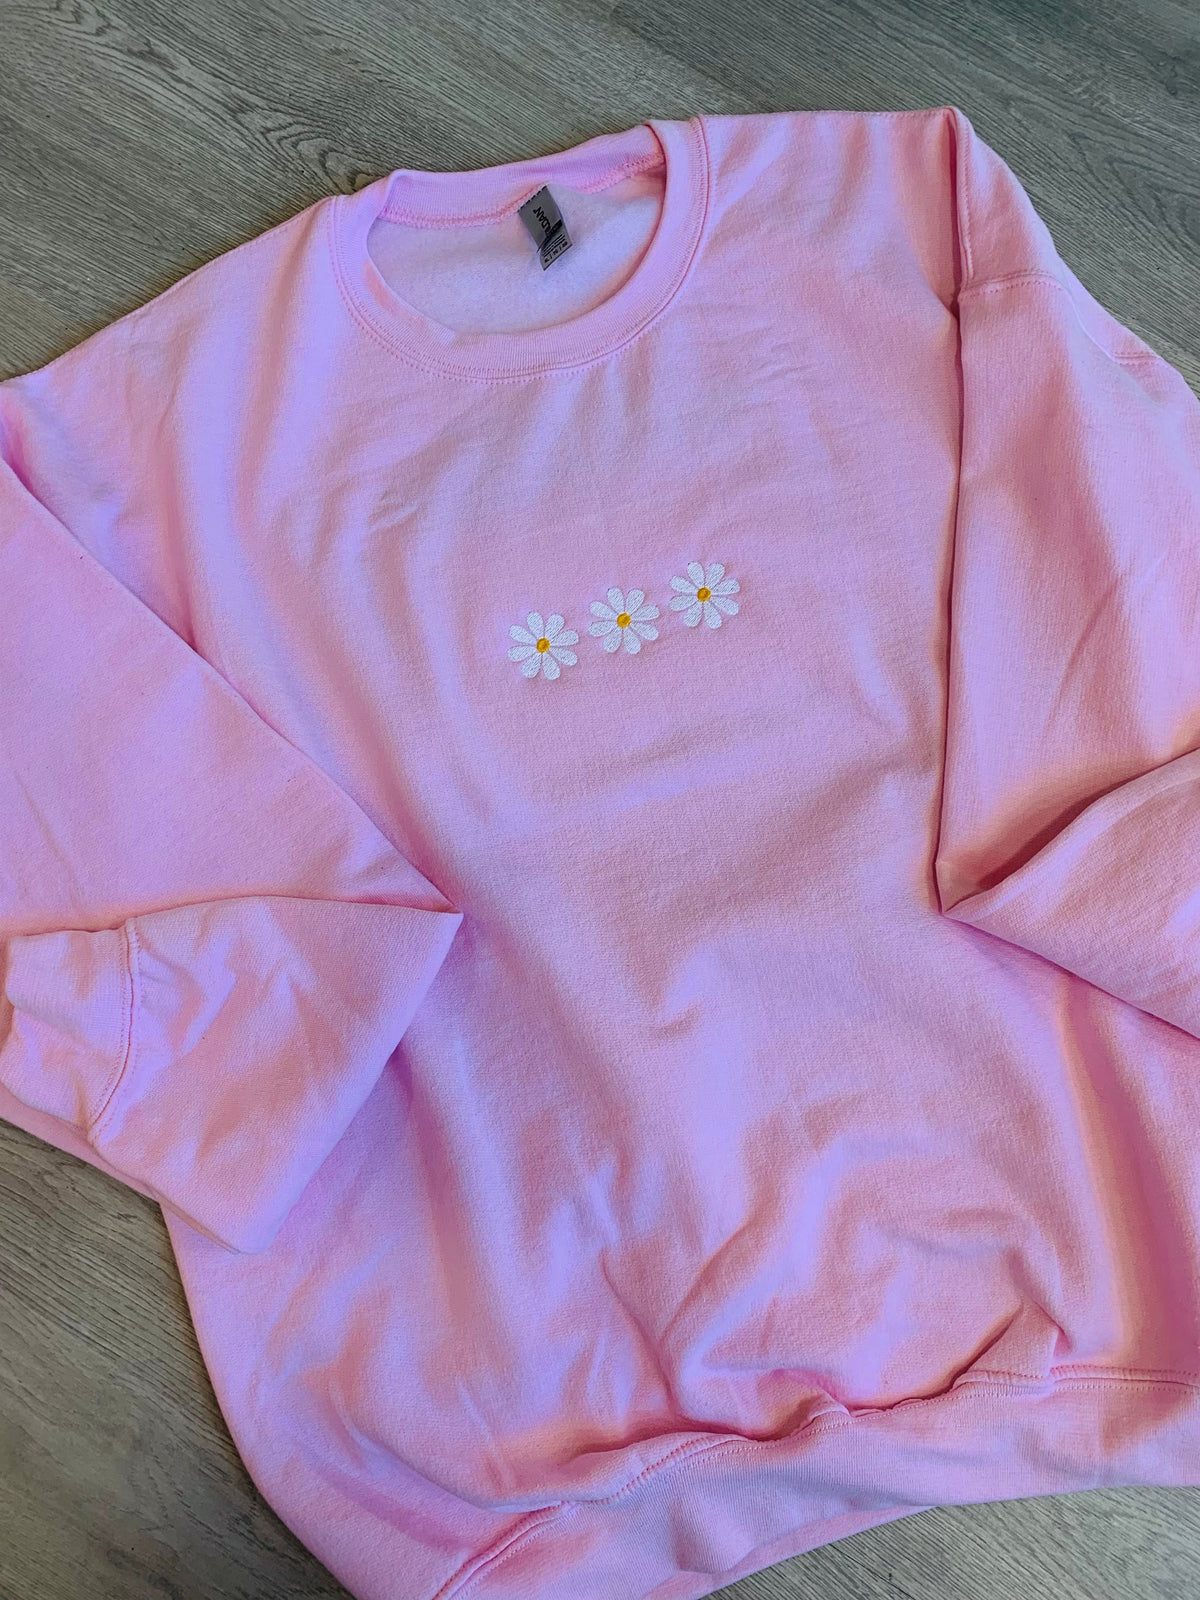 Daisies Embroidered Sweatshirt-Sweatshirt-Peachy Keen Boutique-Peachy Keen Boutique, Women's Fashion Boutique, Located in Cape Girardeau and Dexter, MO